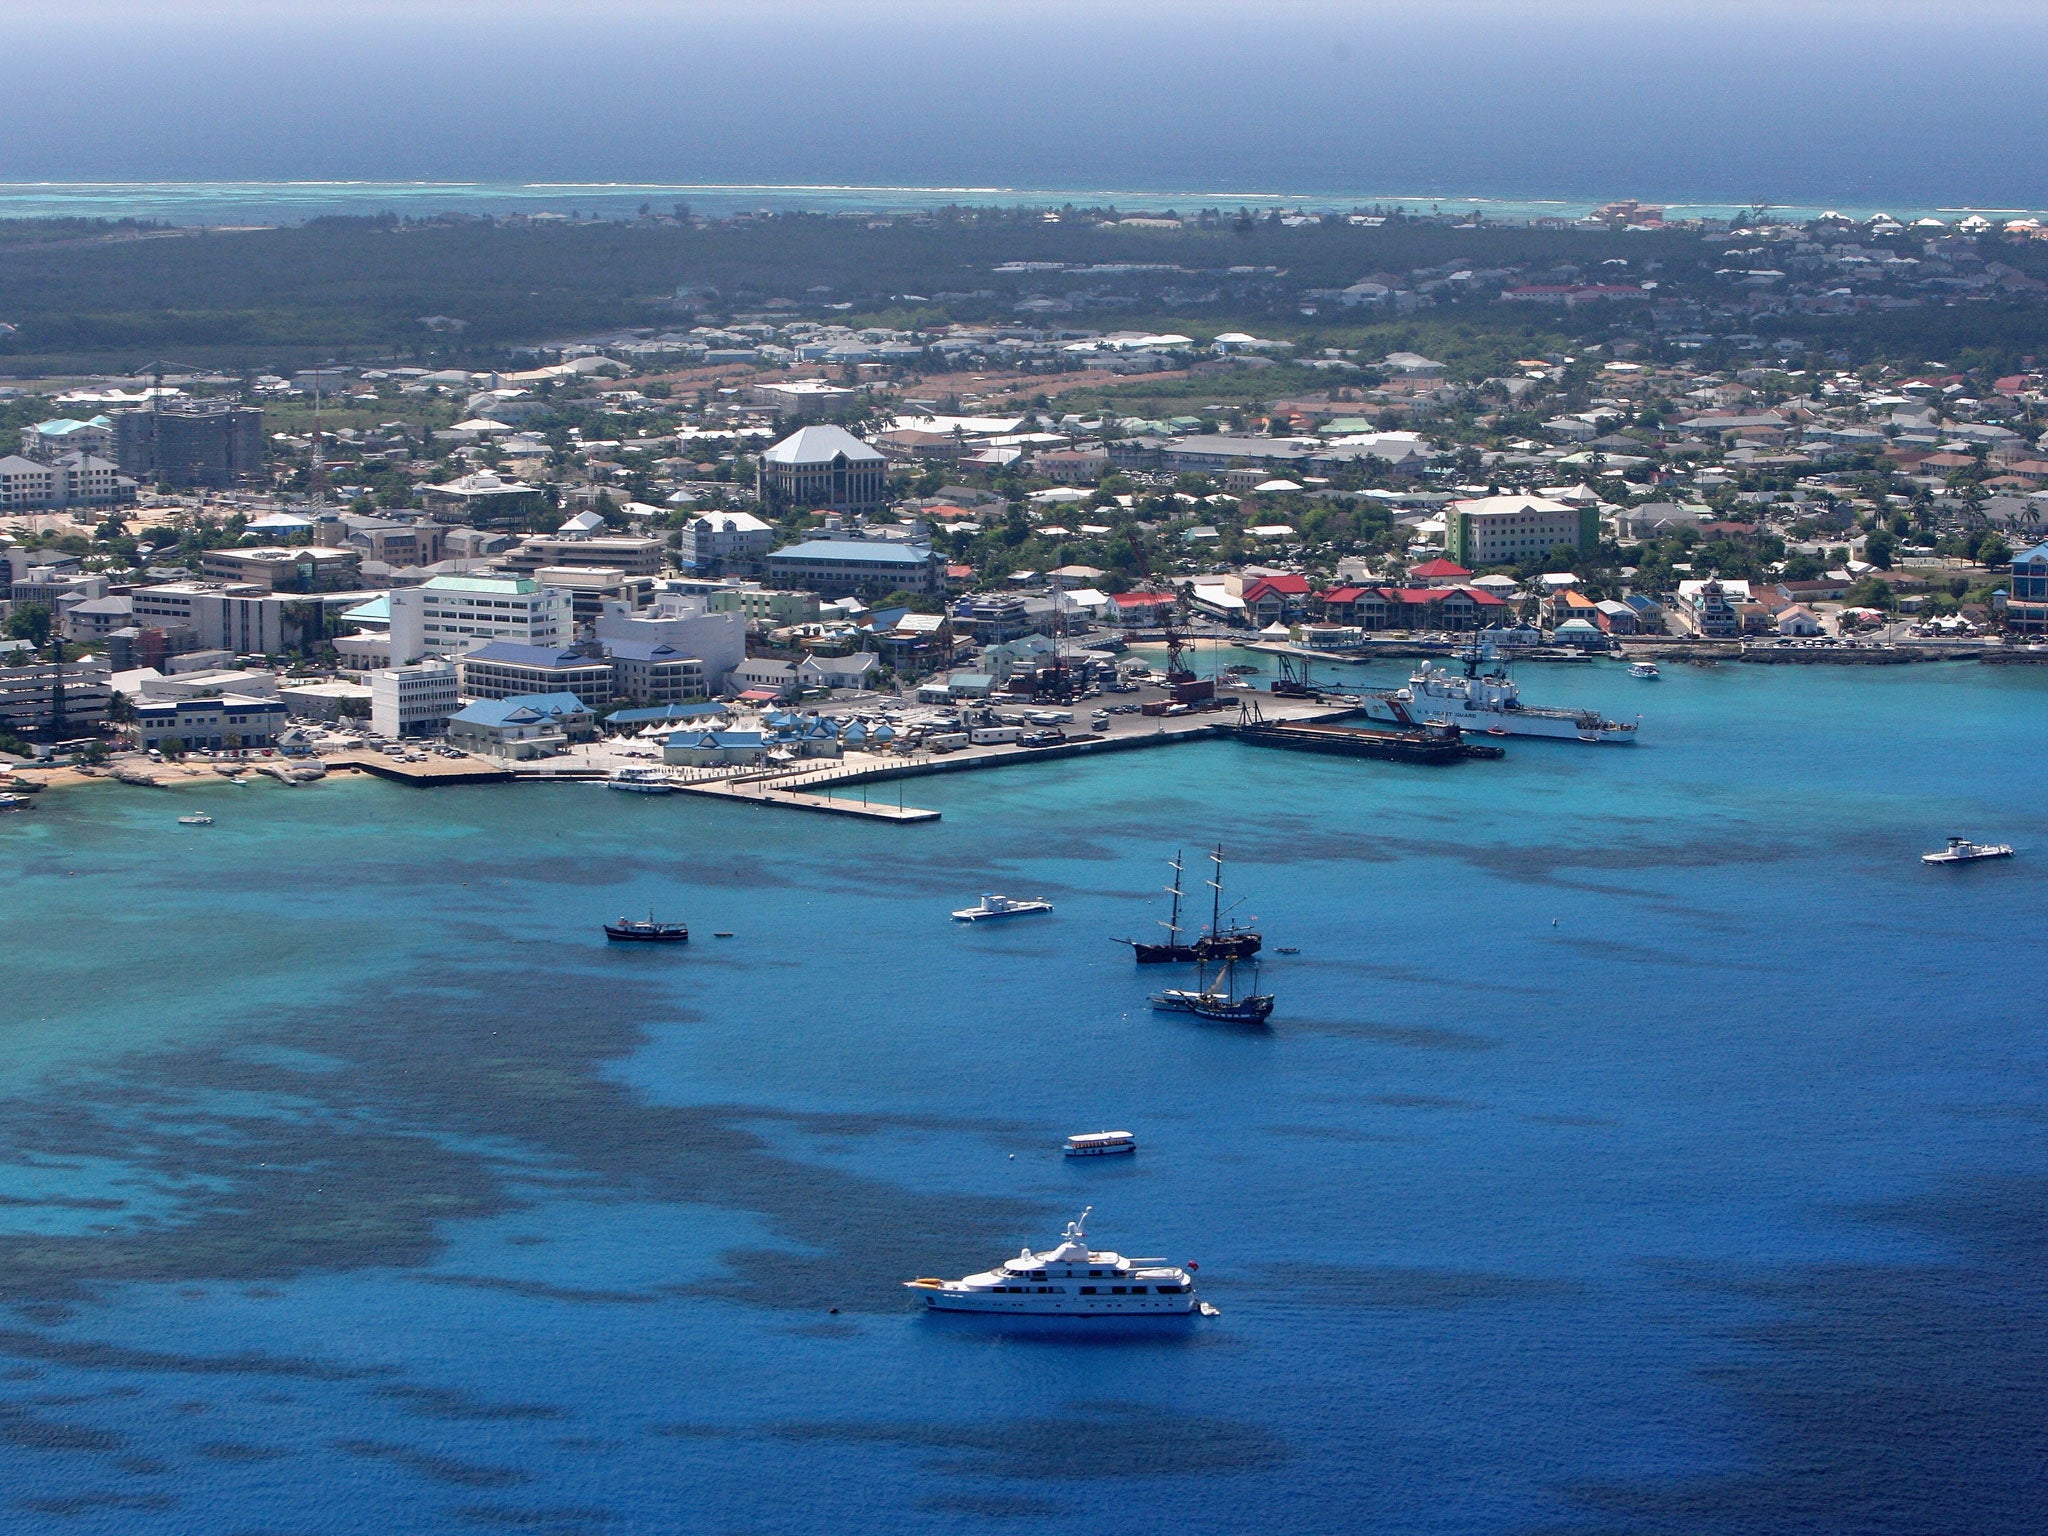 George Town pictured on 24 April, 2008 in Grand Cayman, Cayman Islands.